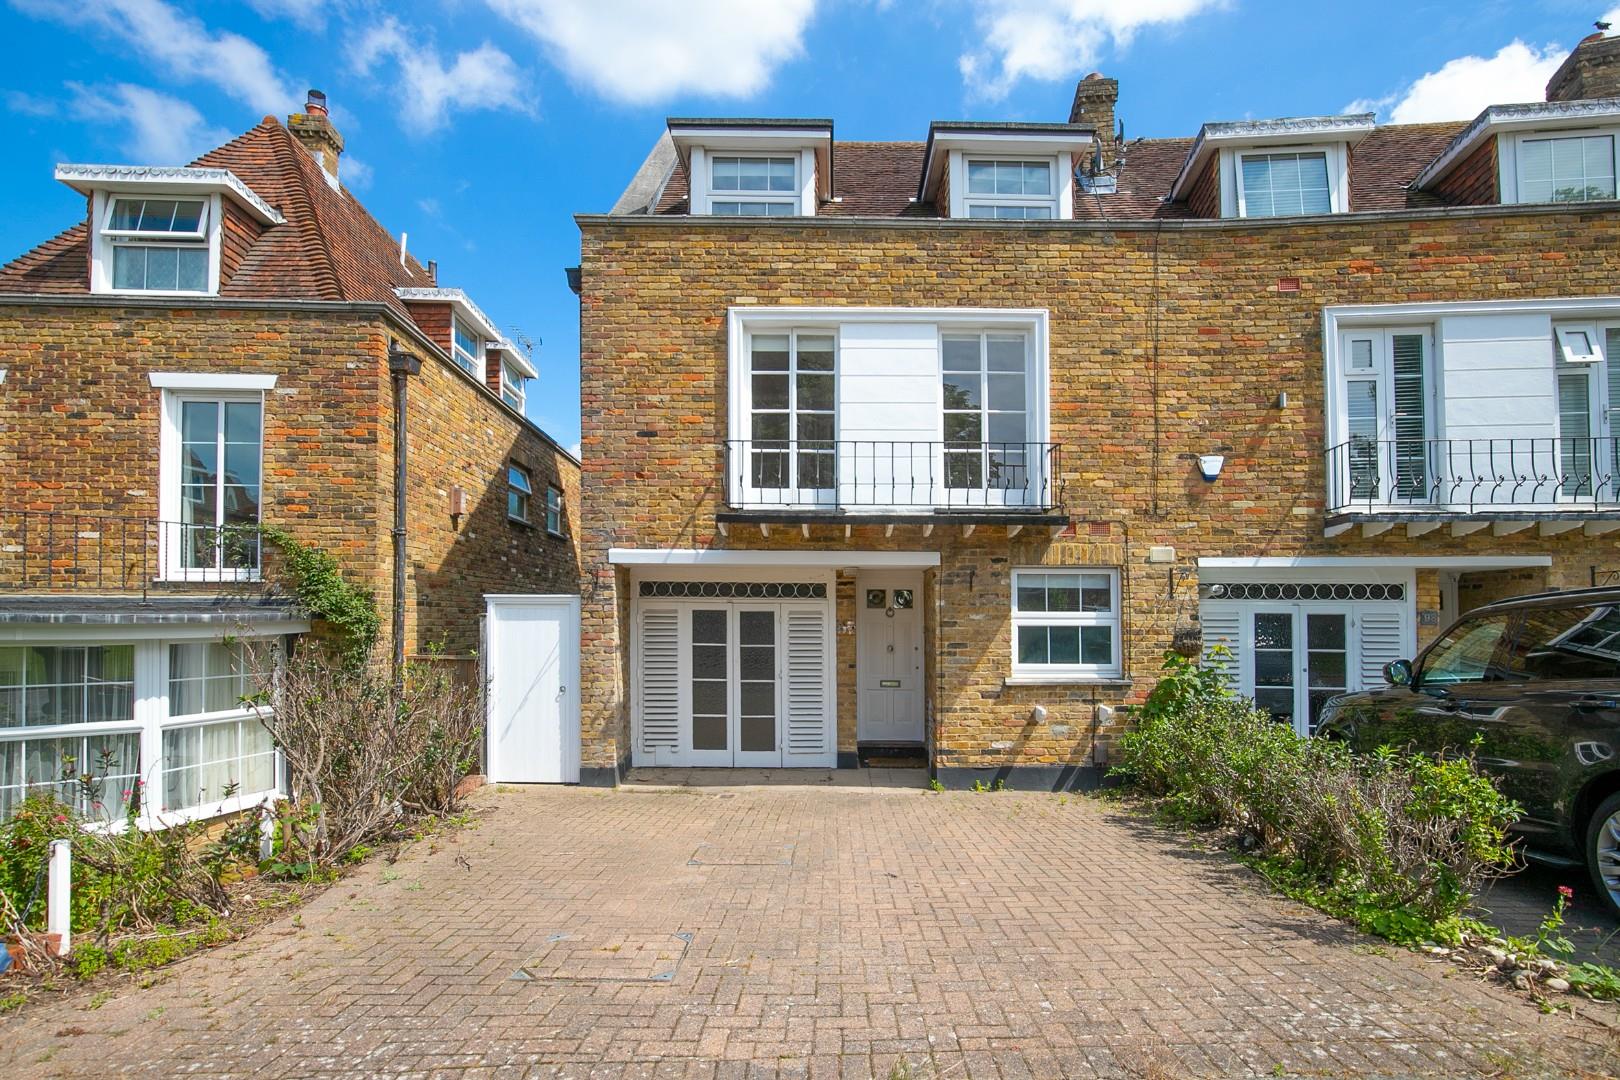 Similar Property: House - End Terrace in Epping